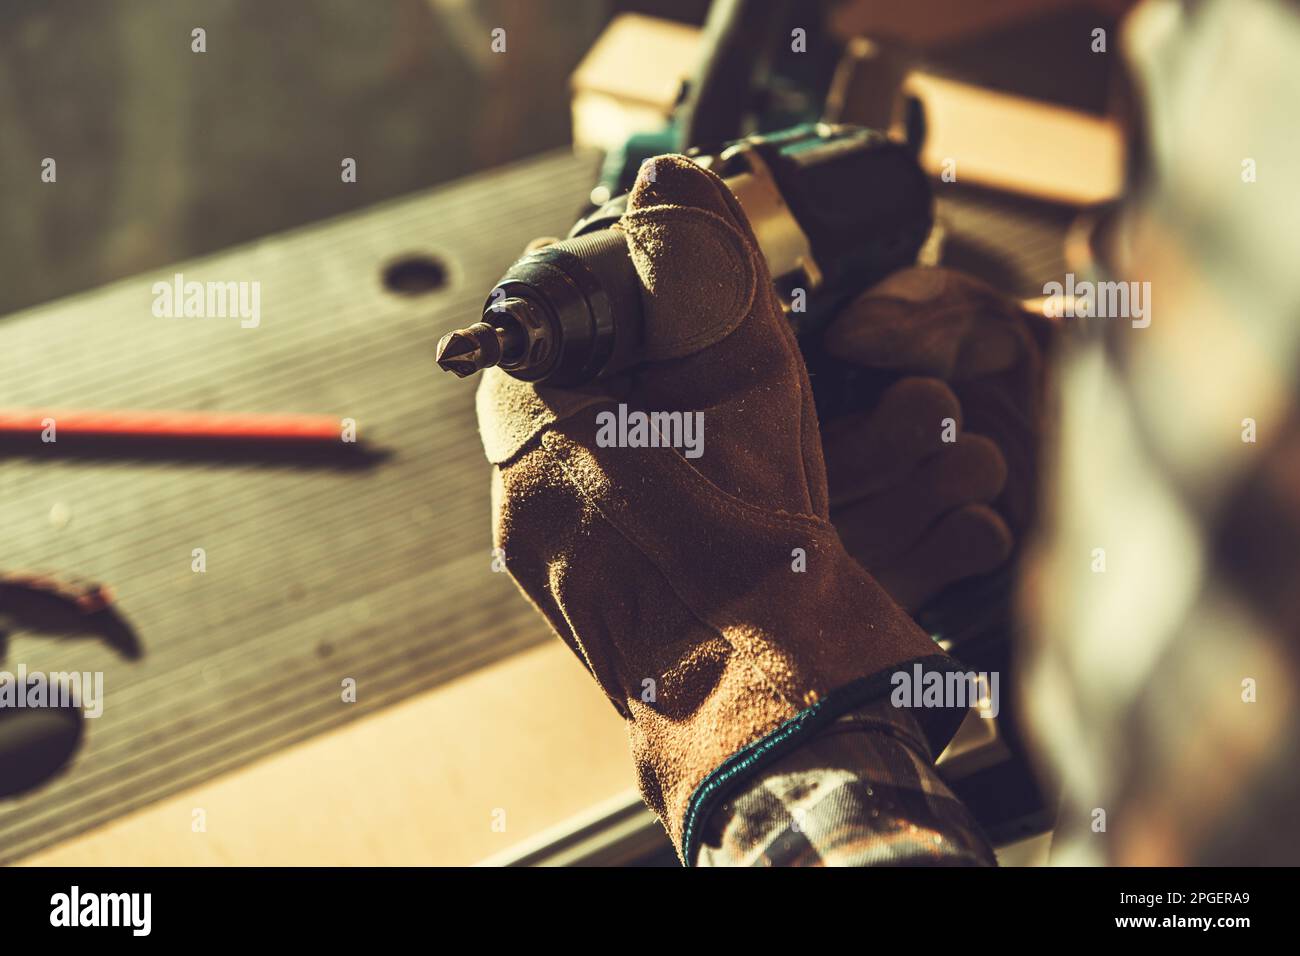 Construction Worker with Cordless Drill Driver and Wood Boring Drill Bit Attached Close Up Photo. Stock Photo